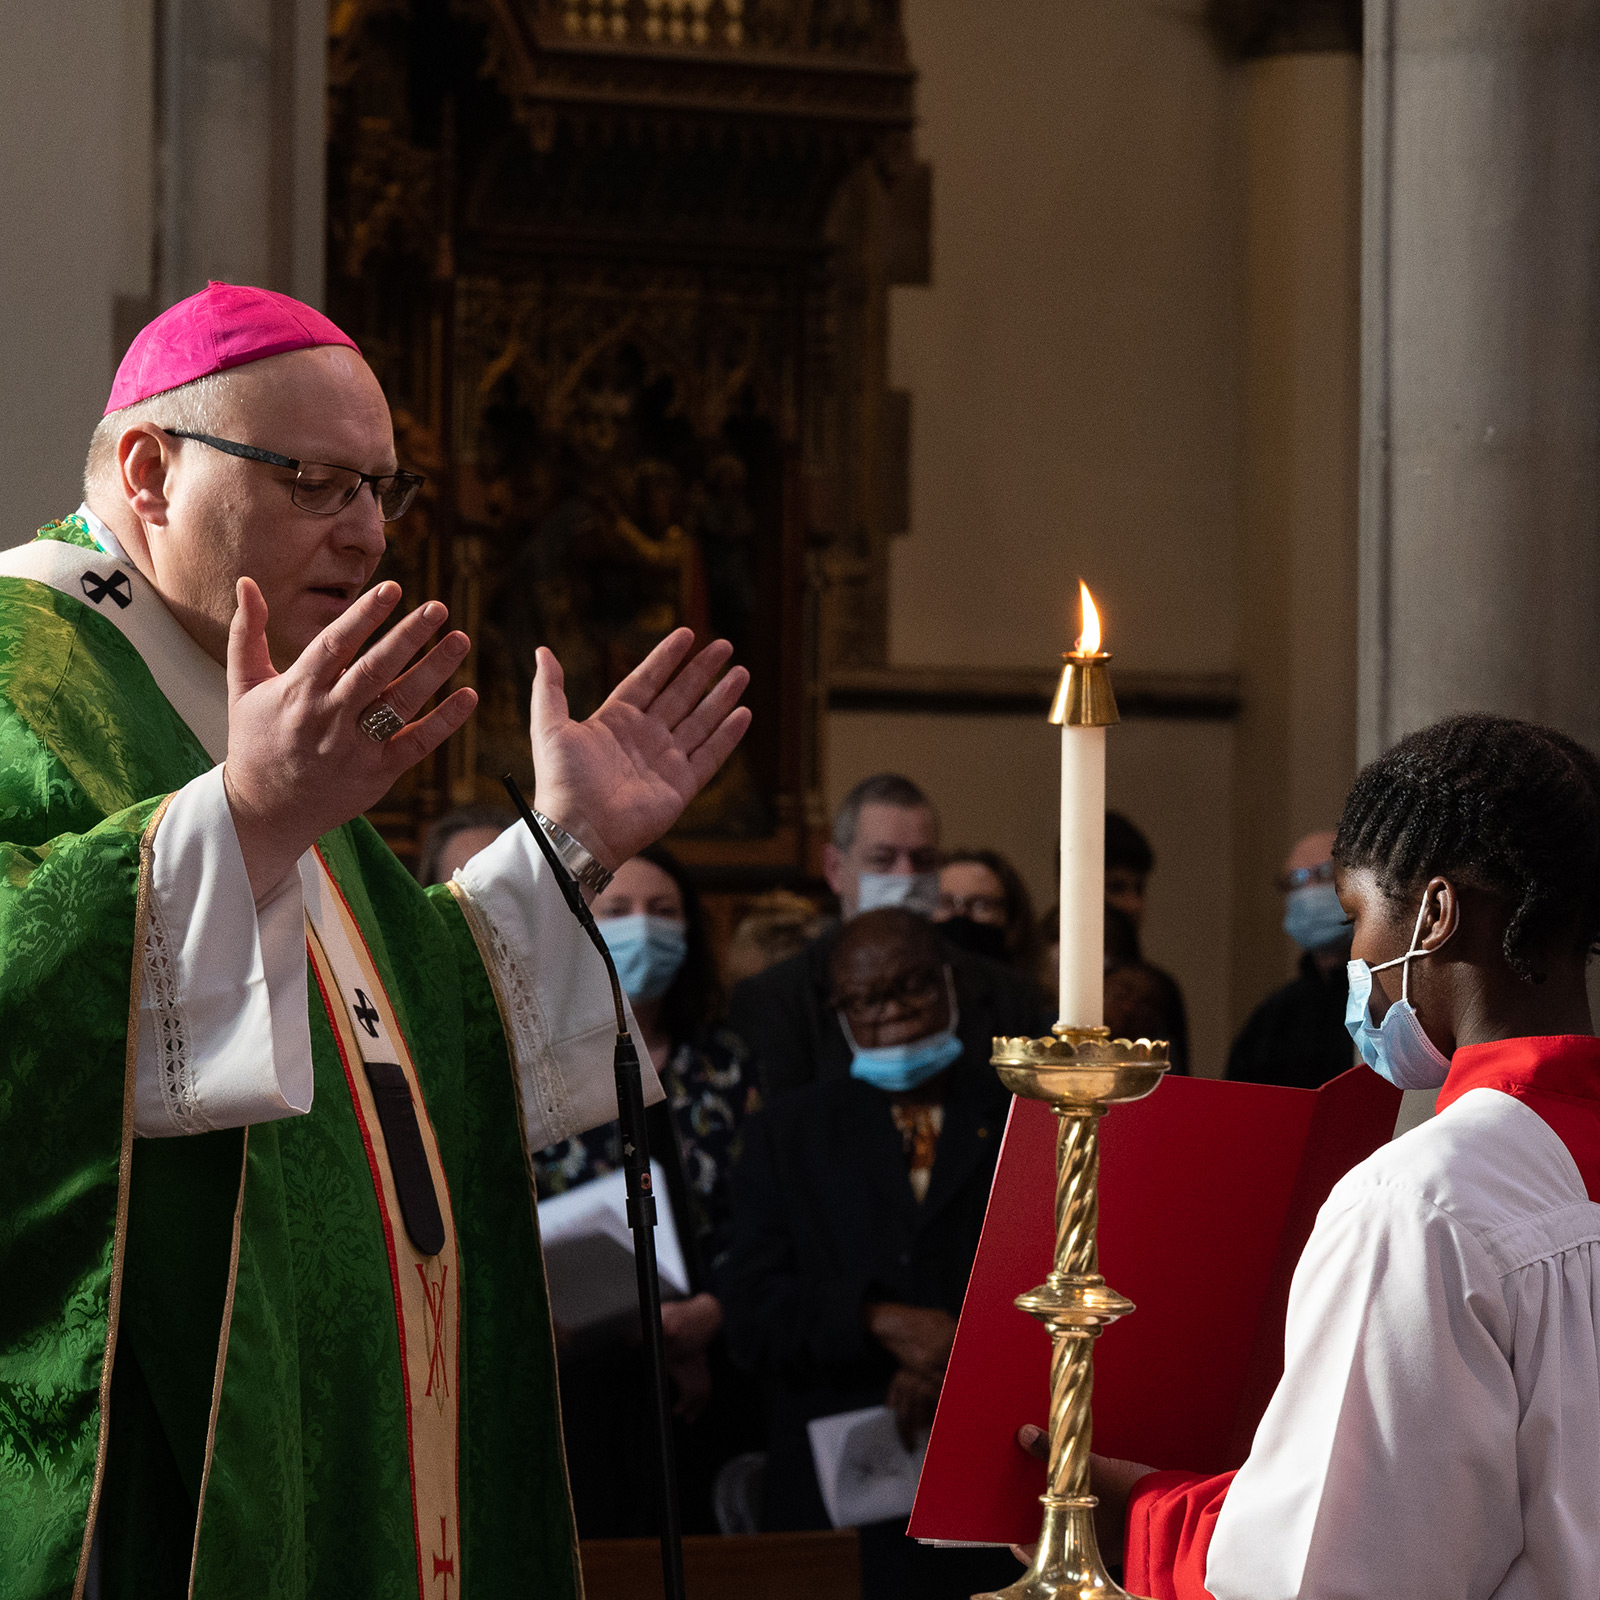 Archbishop: There is no place for racial injustice in the life of the Catholic Church